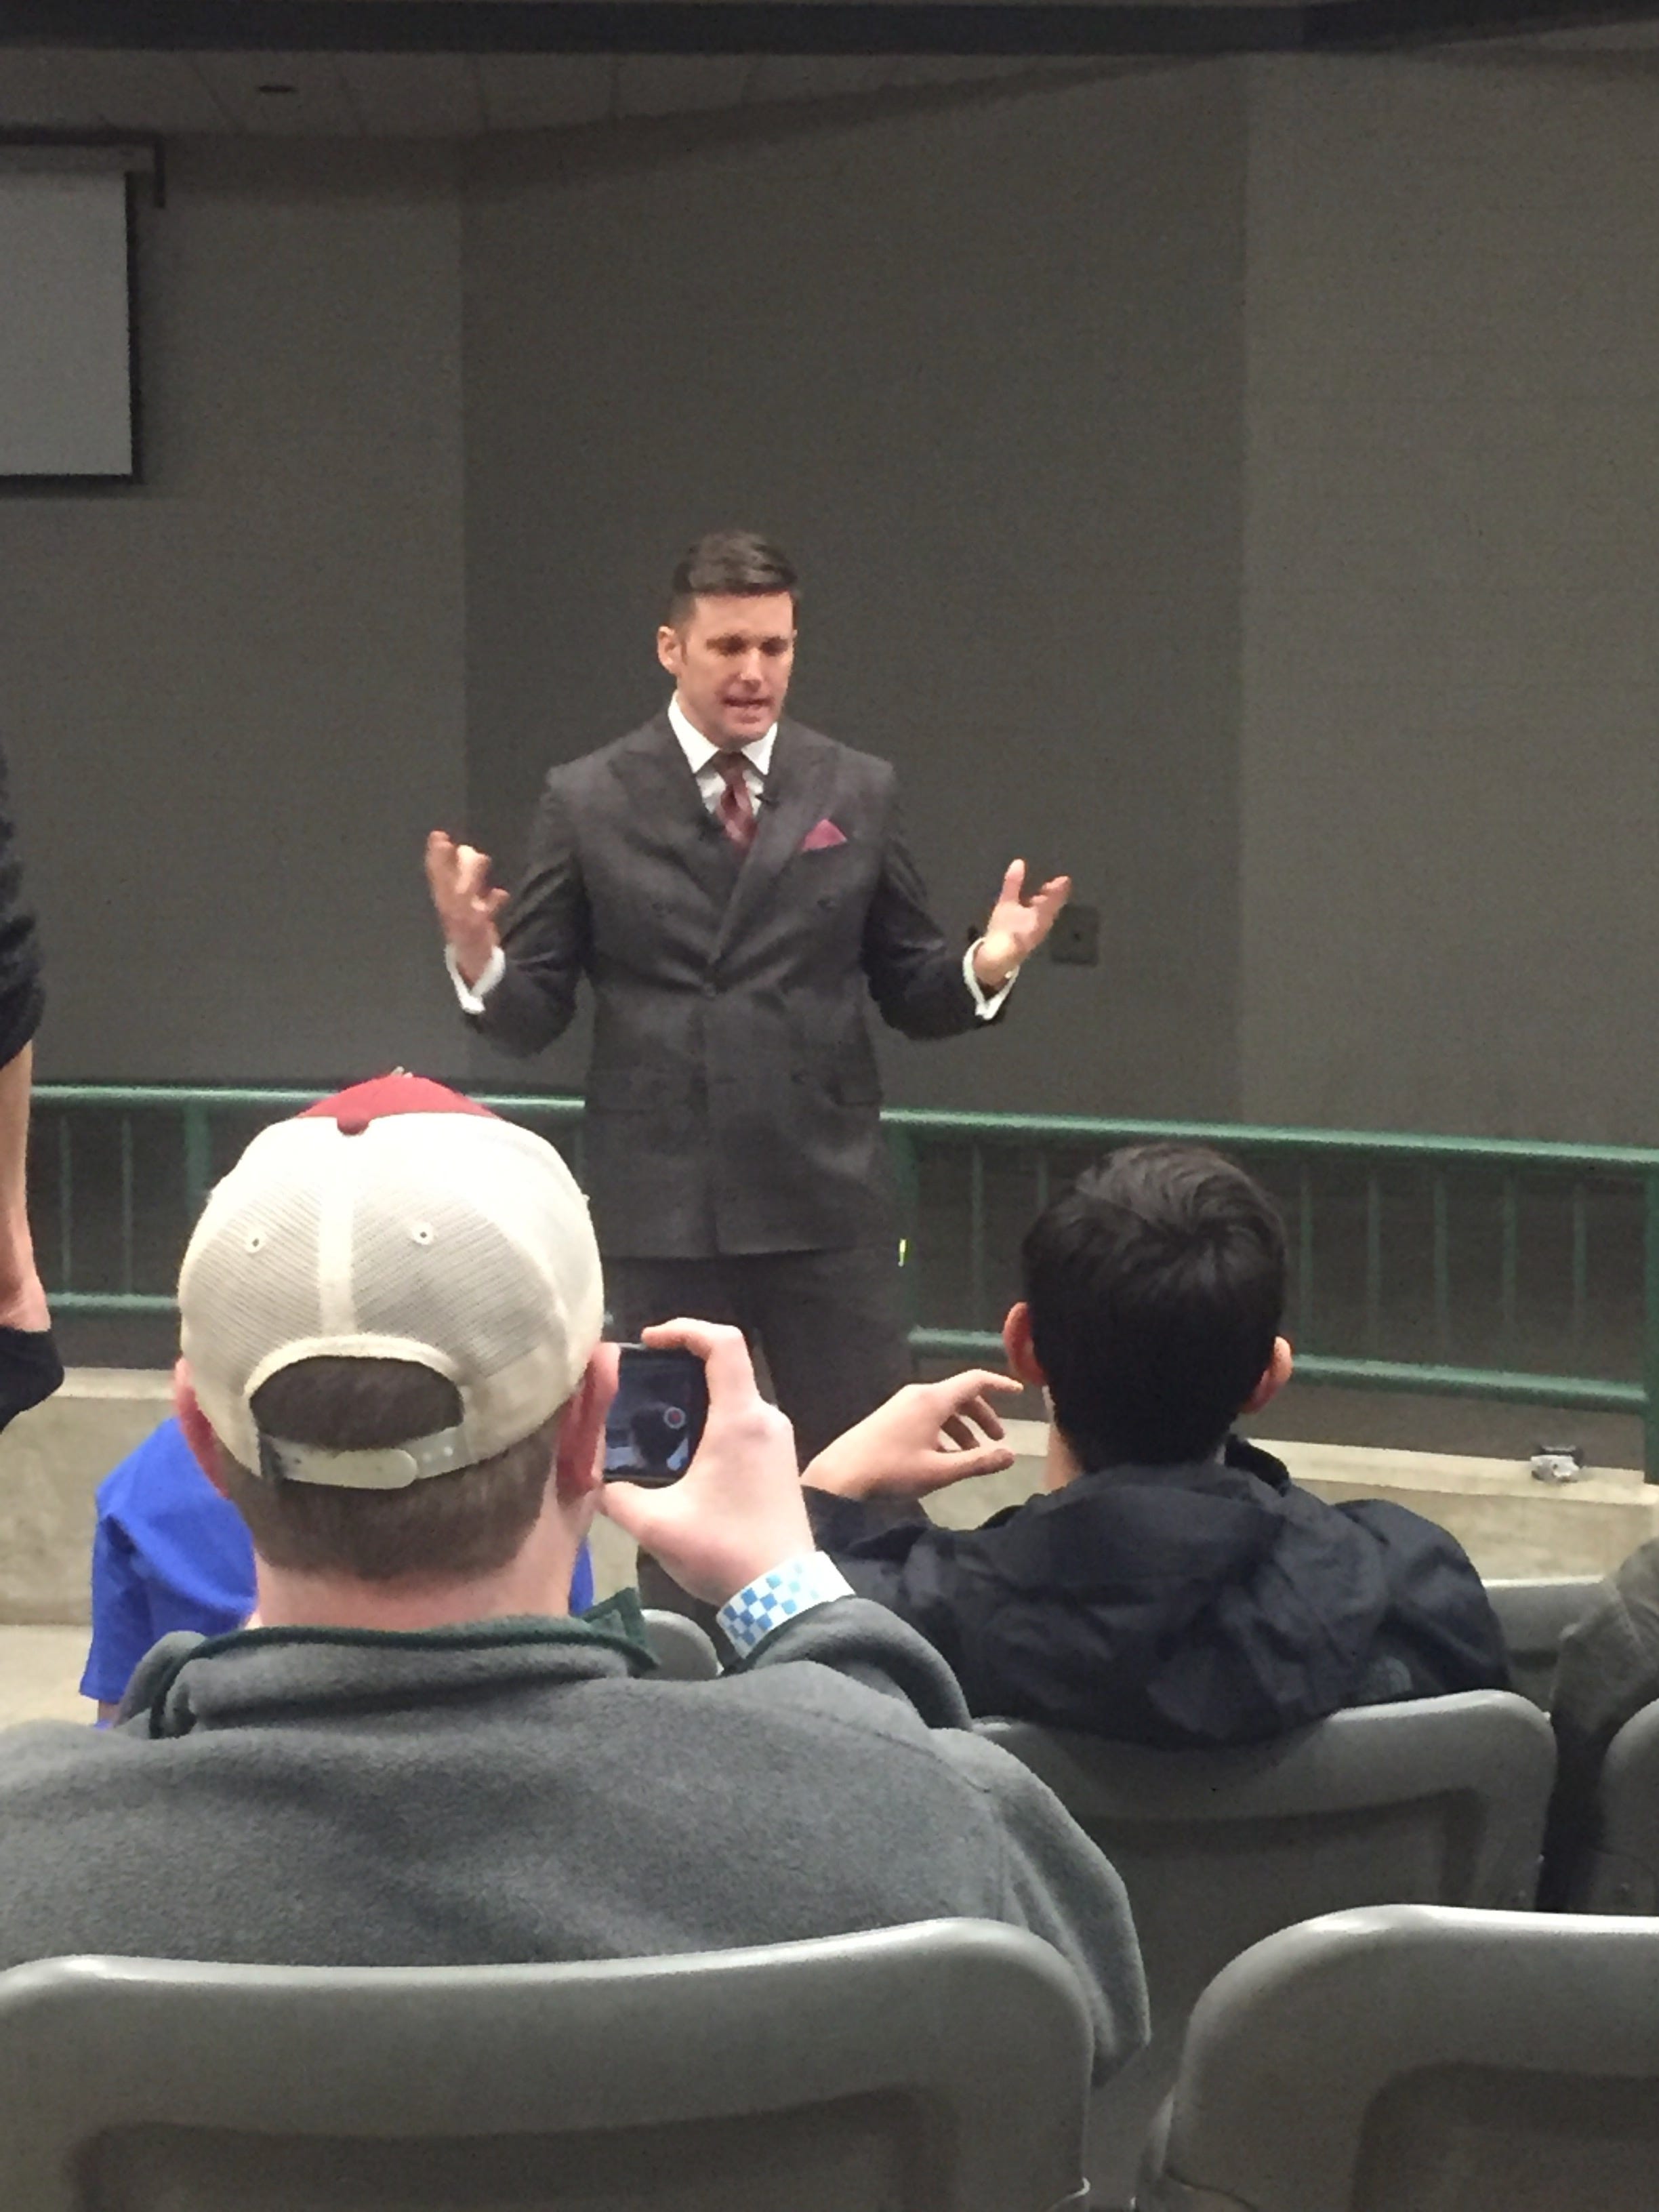 White nationalist Richard Spencer speaks to a small group of people inside the Pavilion for Agriculture and Livestock Education at Michigan State University.